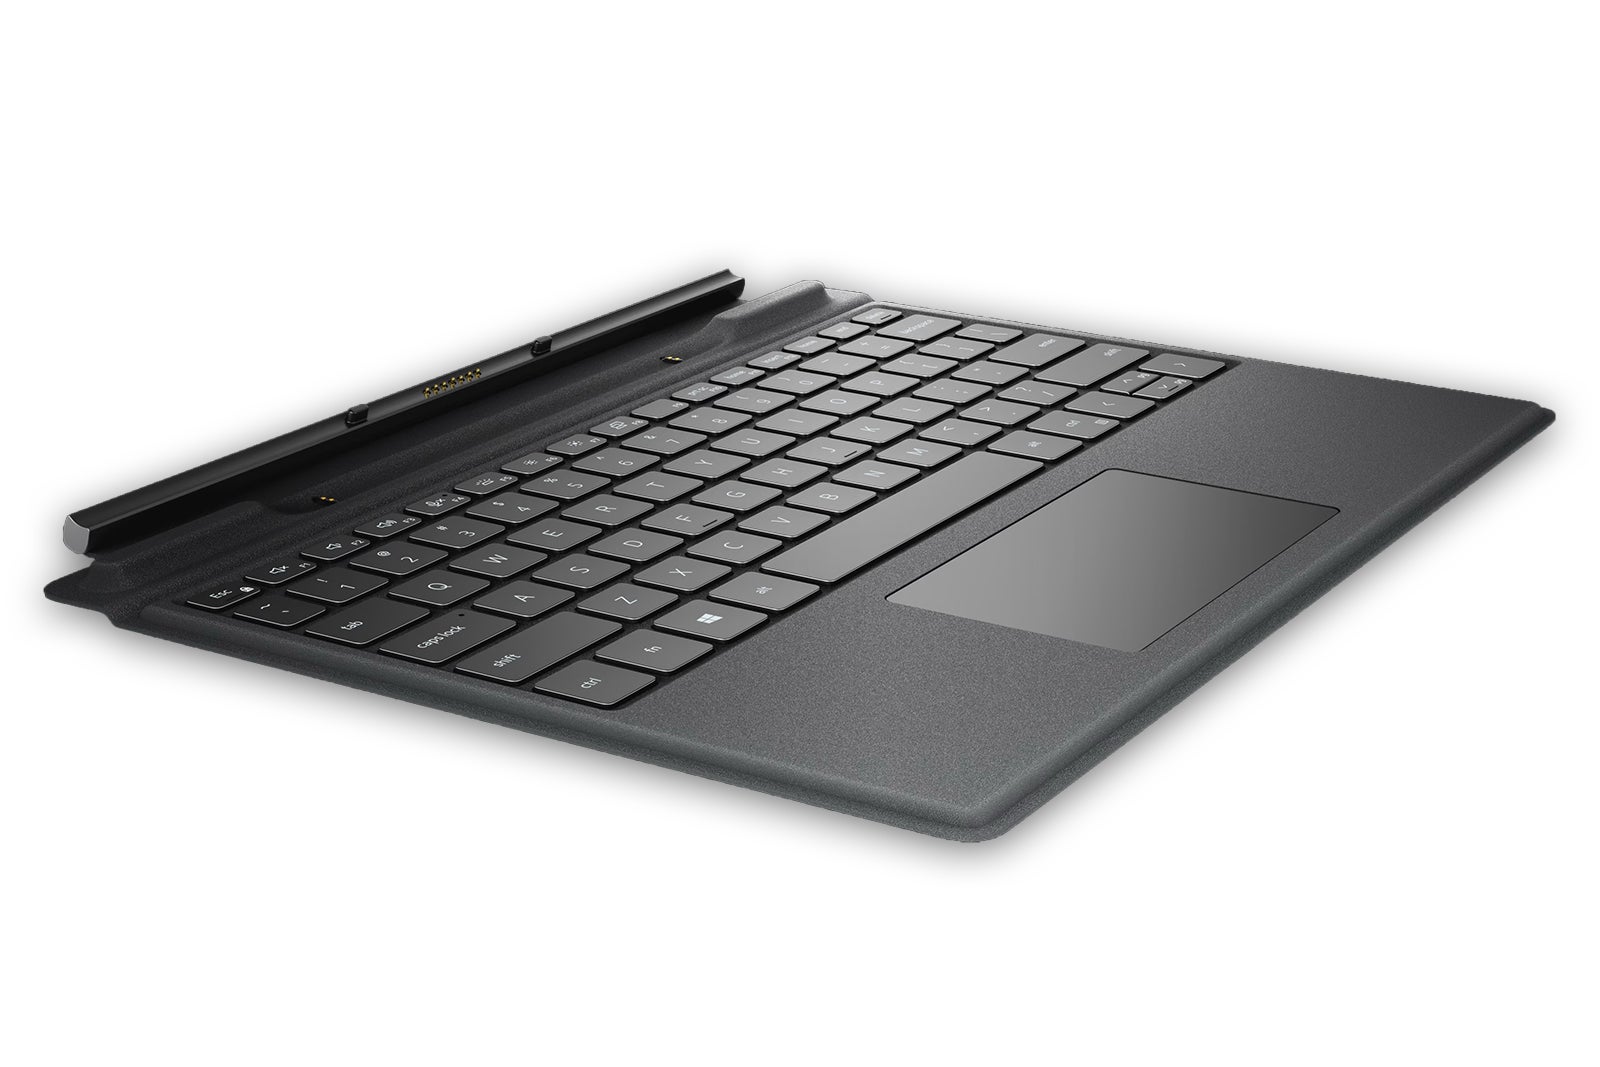 Dell detachable keyboard for travel